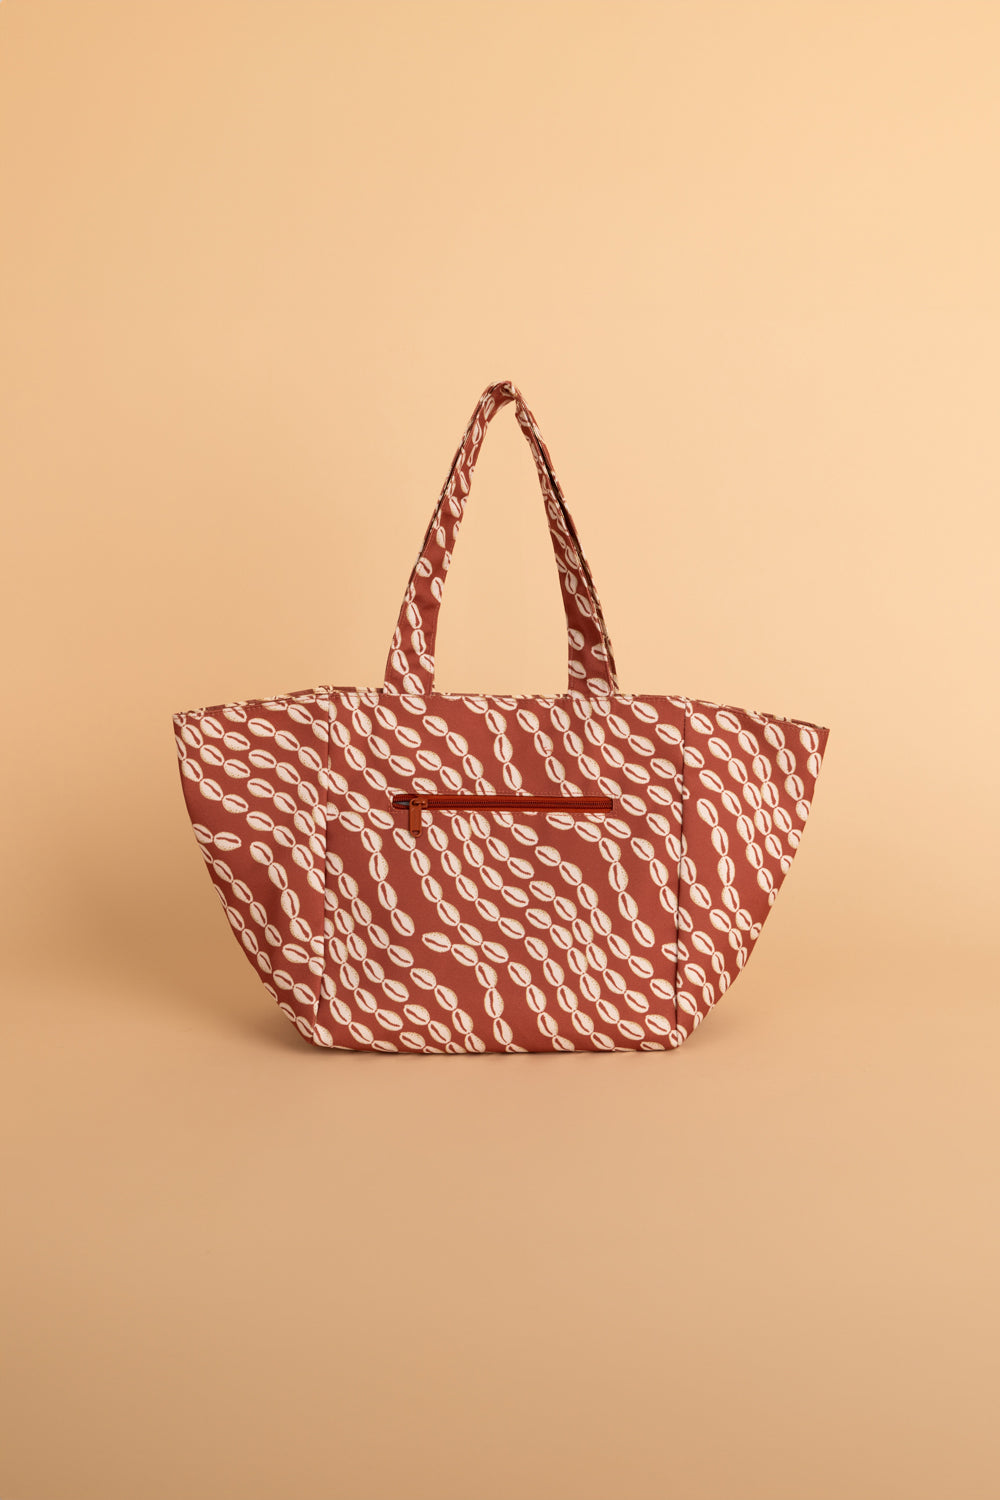 Small Reversible Tote - Ginger/Light Spice Cowrie